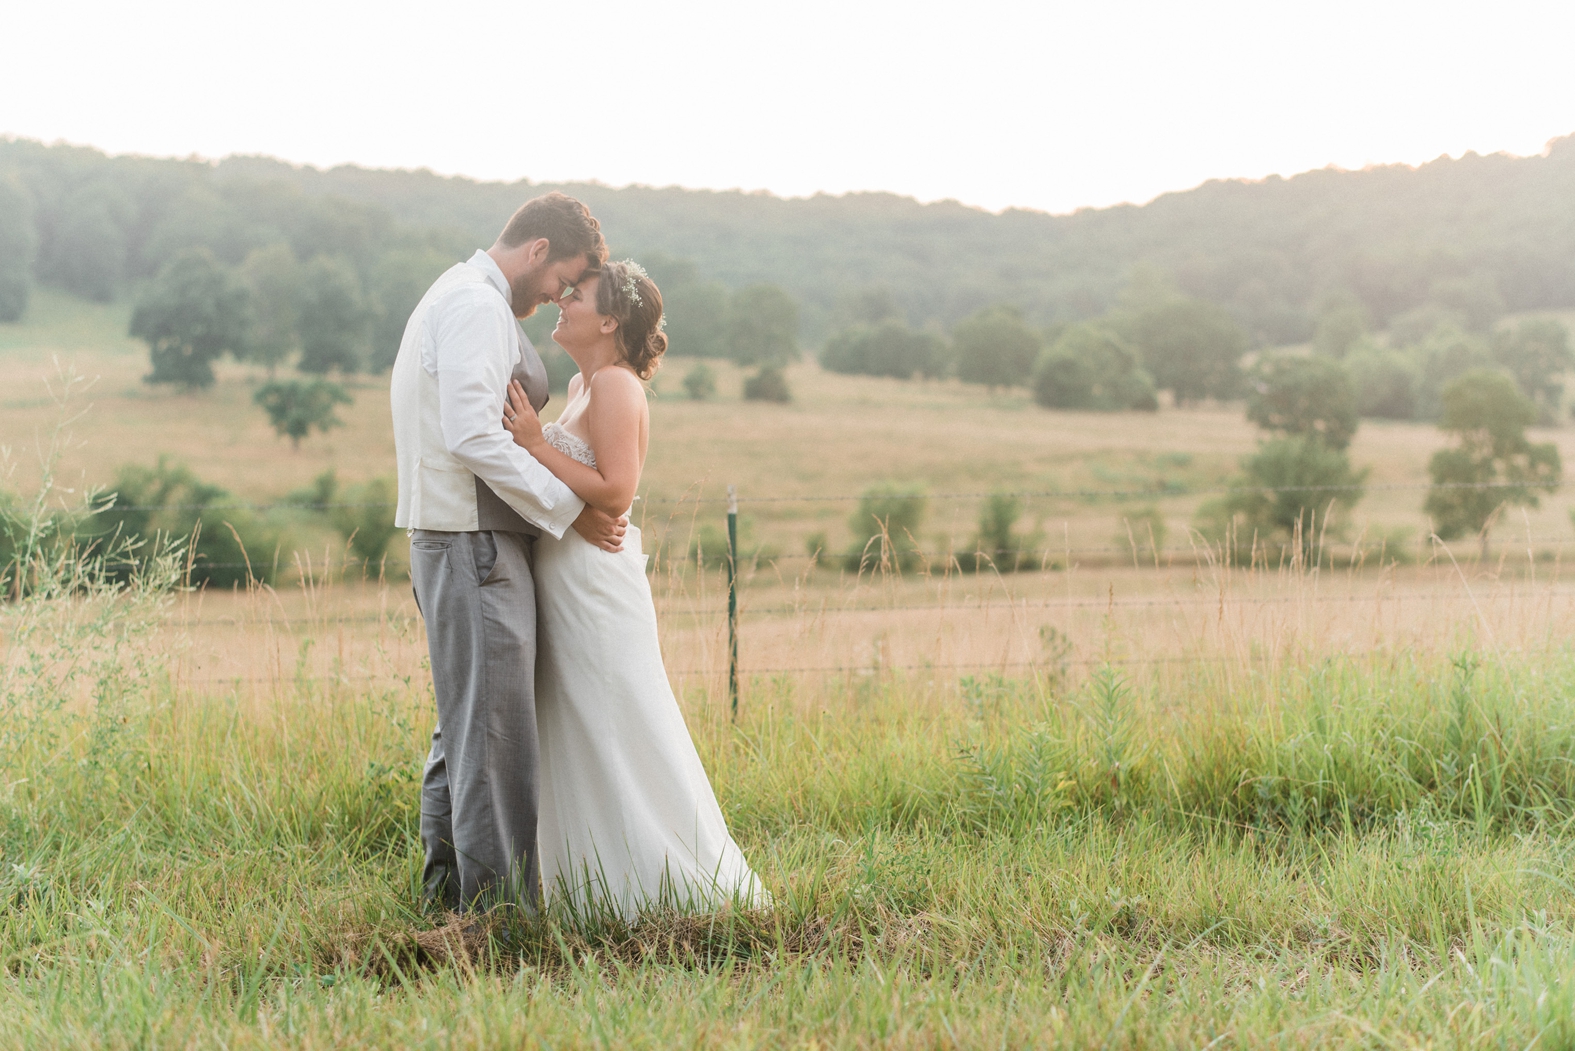 Bride and groom portrait in field at sunset; groom in gray suit, bride in baby's breath flower crown, Little Piney Lodge in Hermann MO